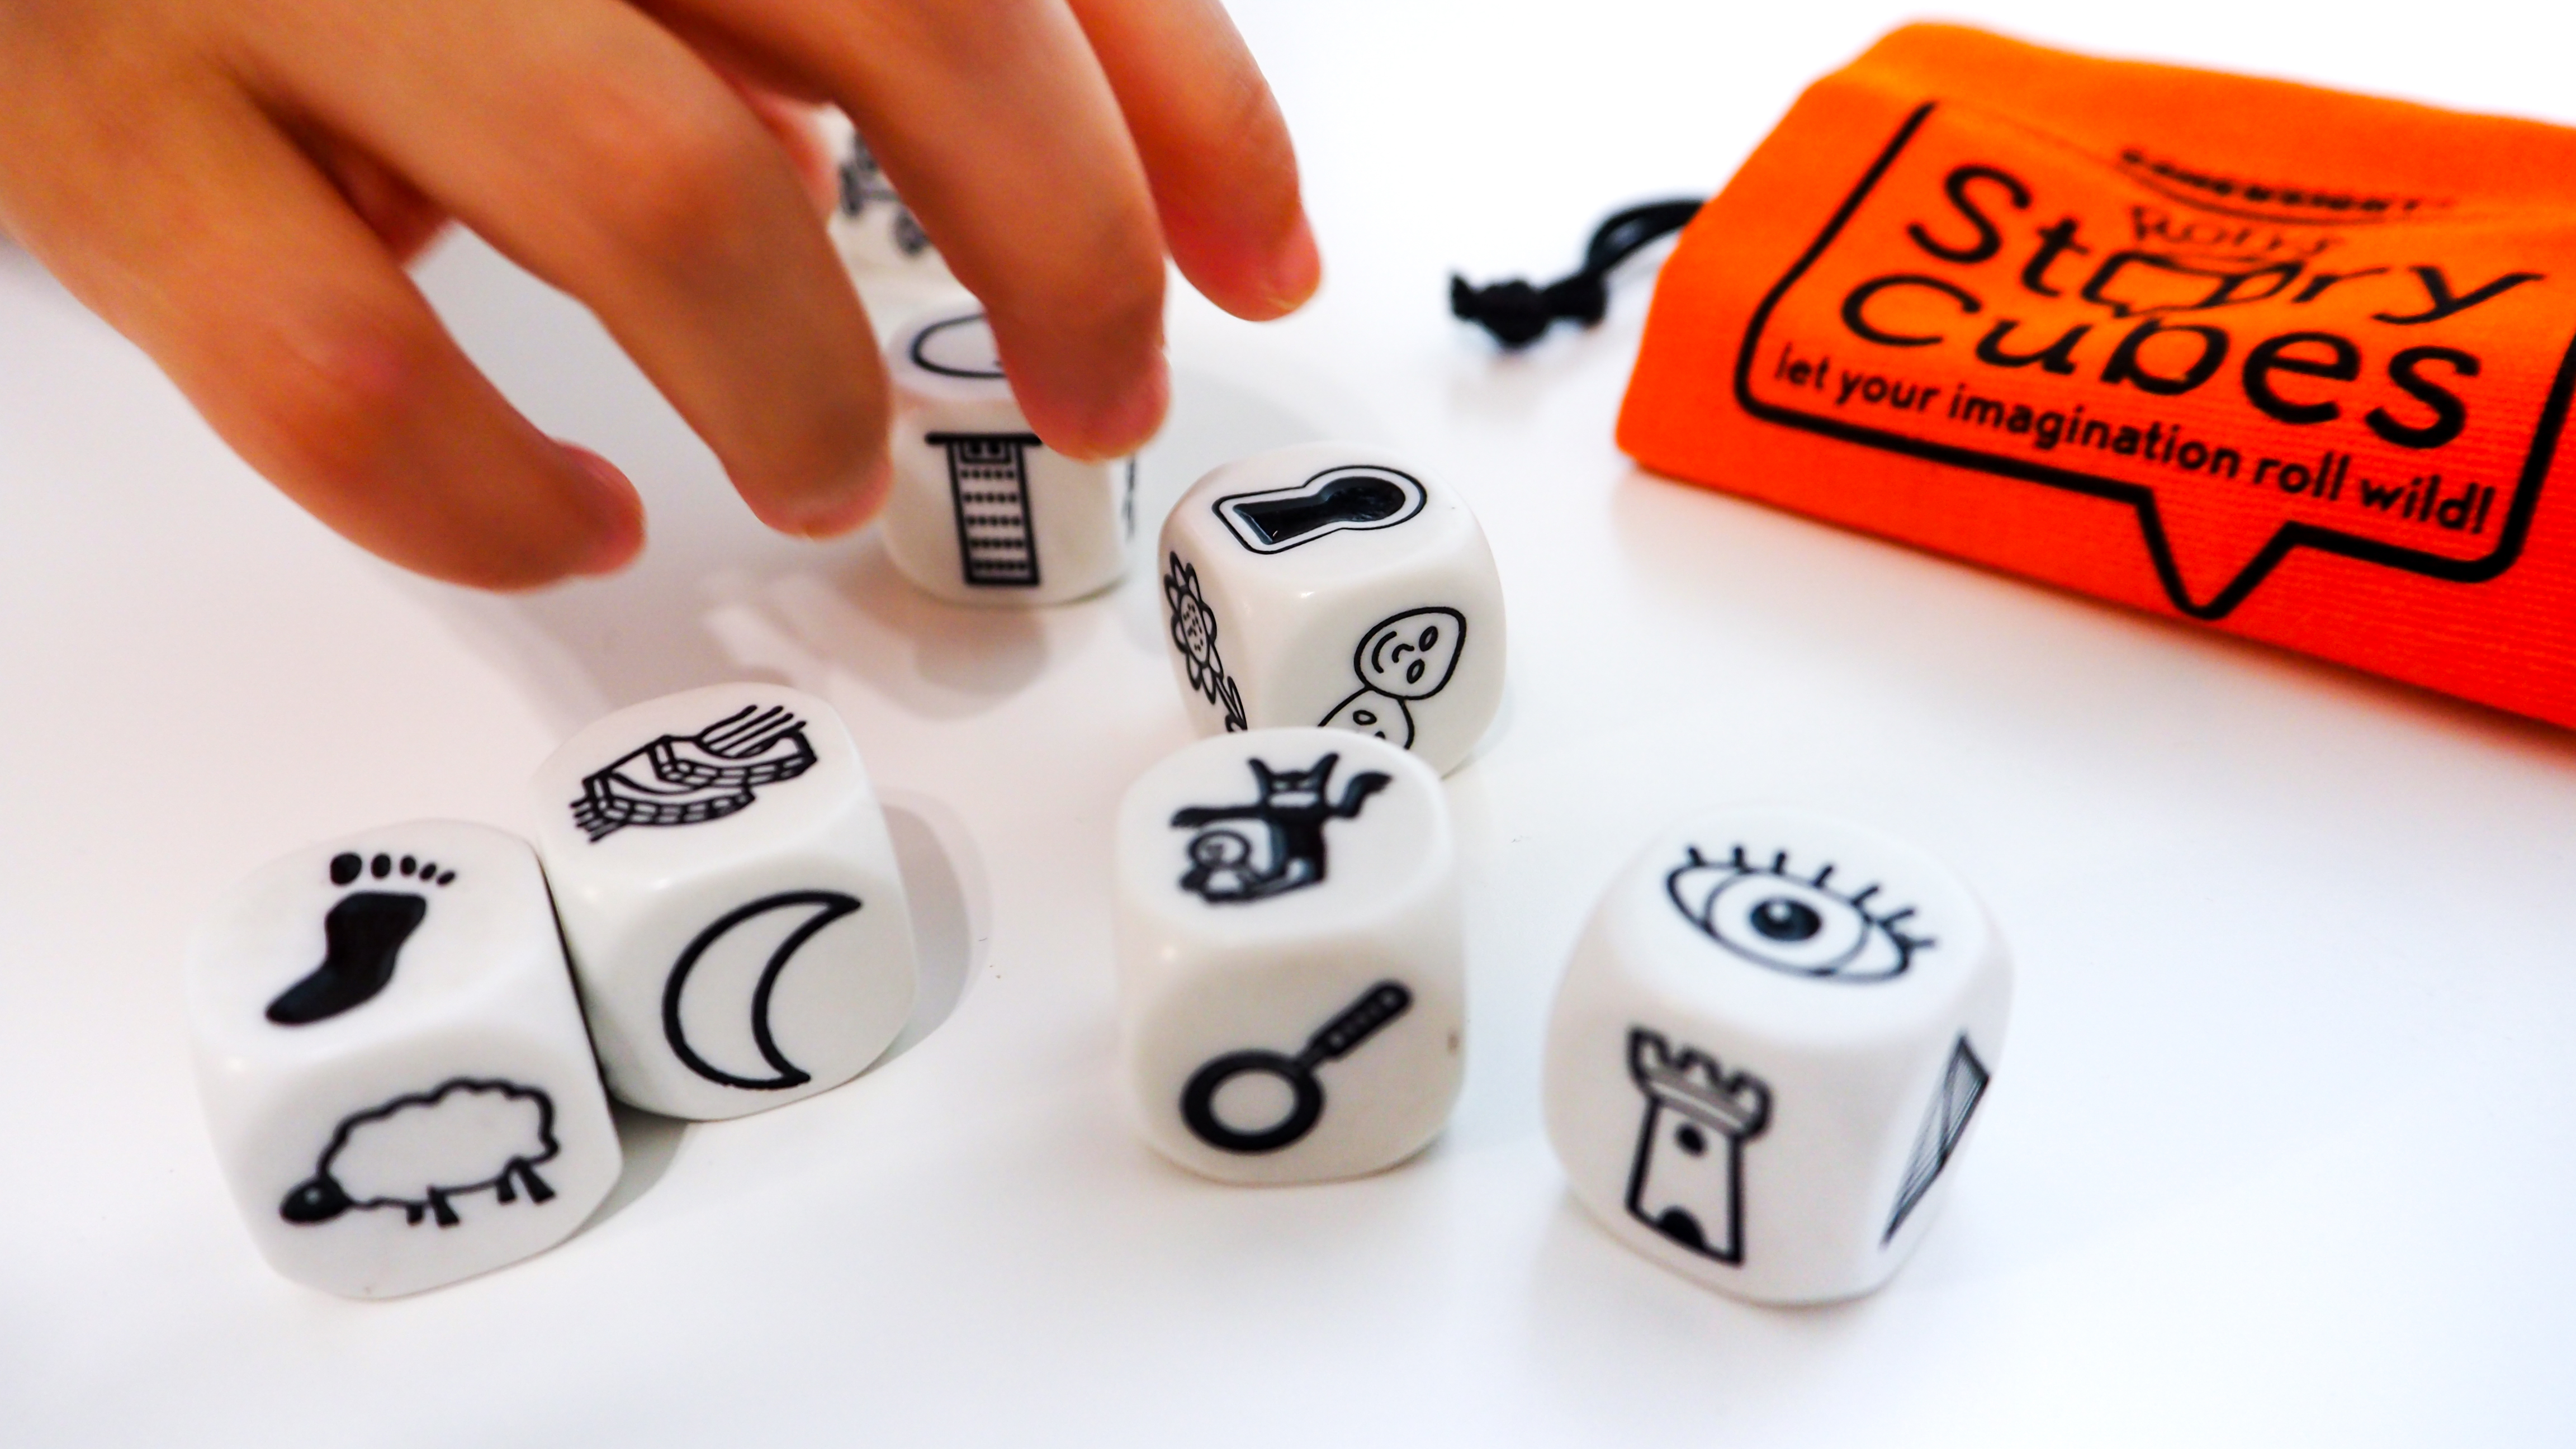 Rory's story cubes-故事骰